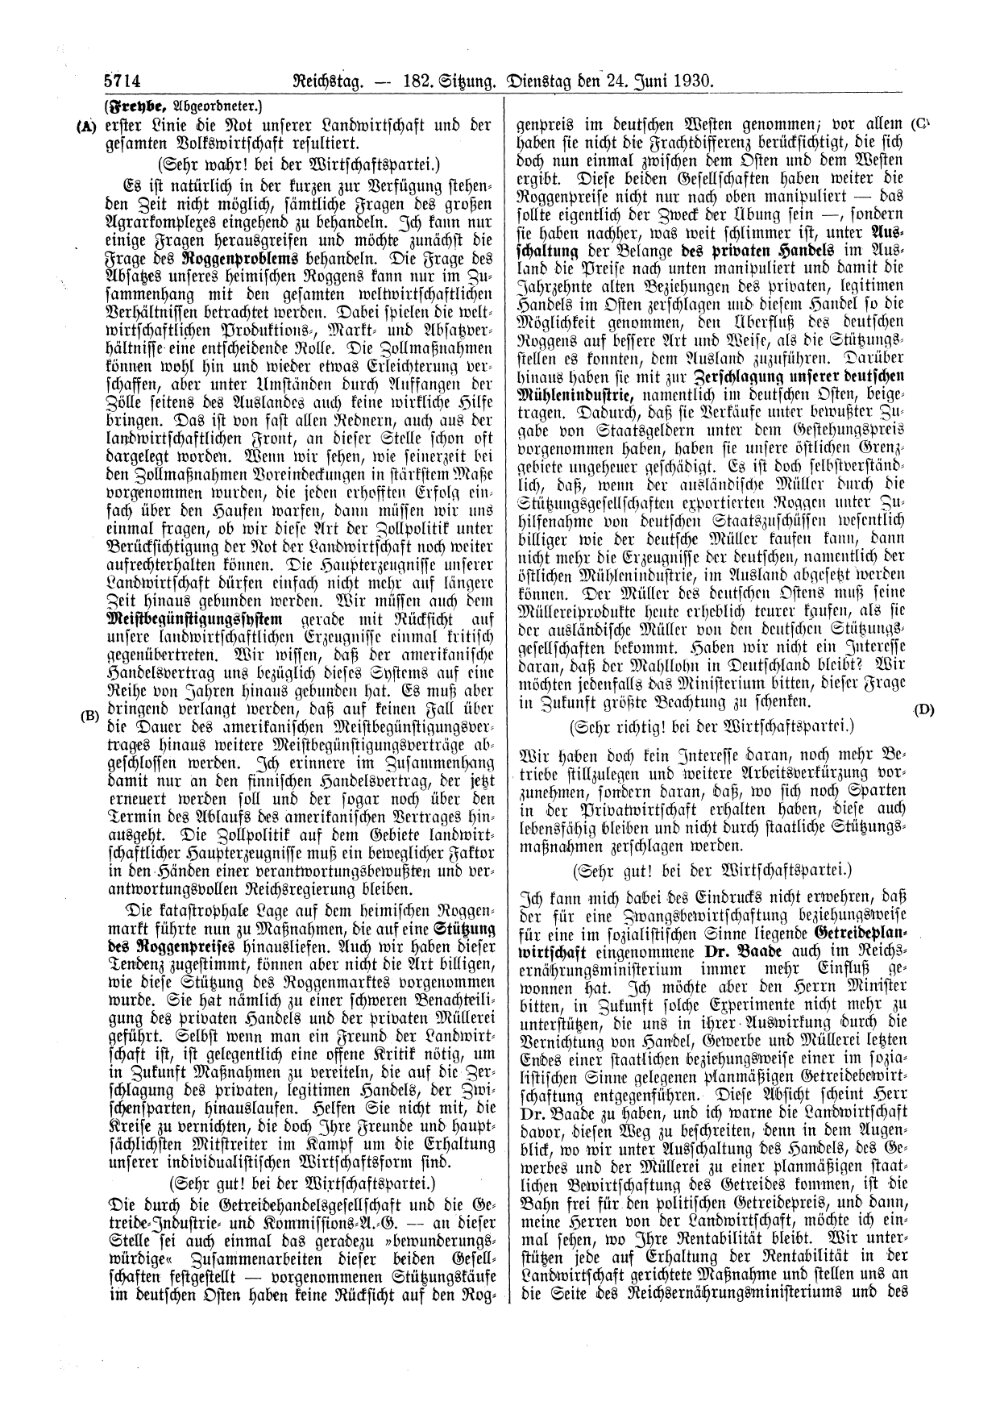 Scan of page 5714